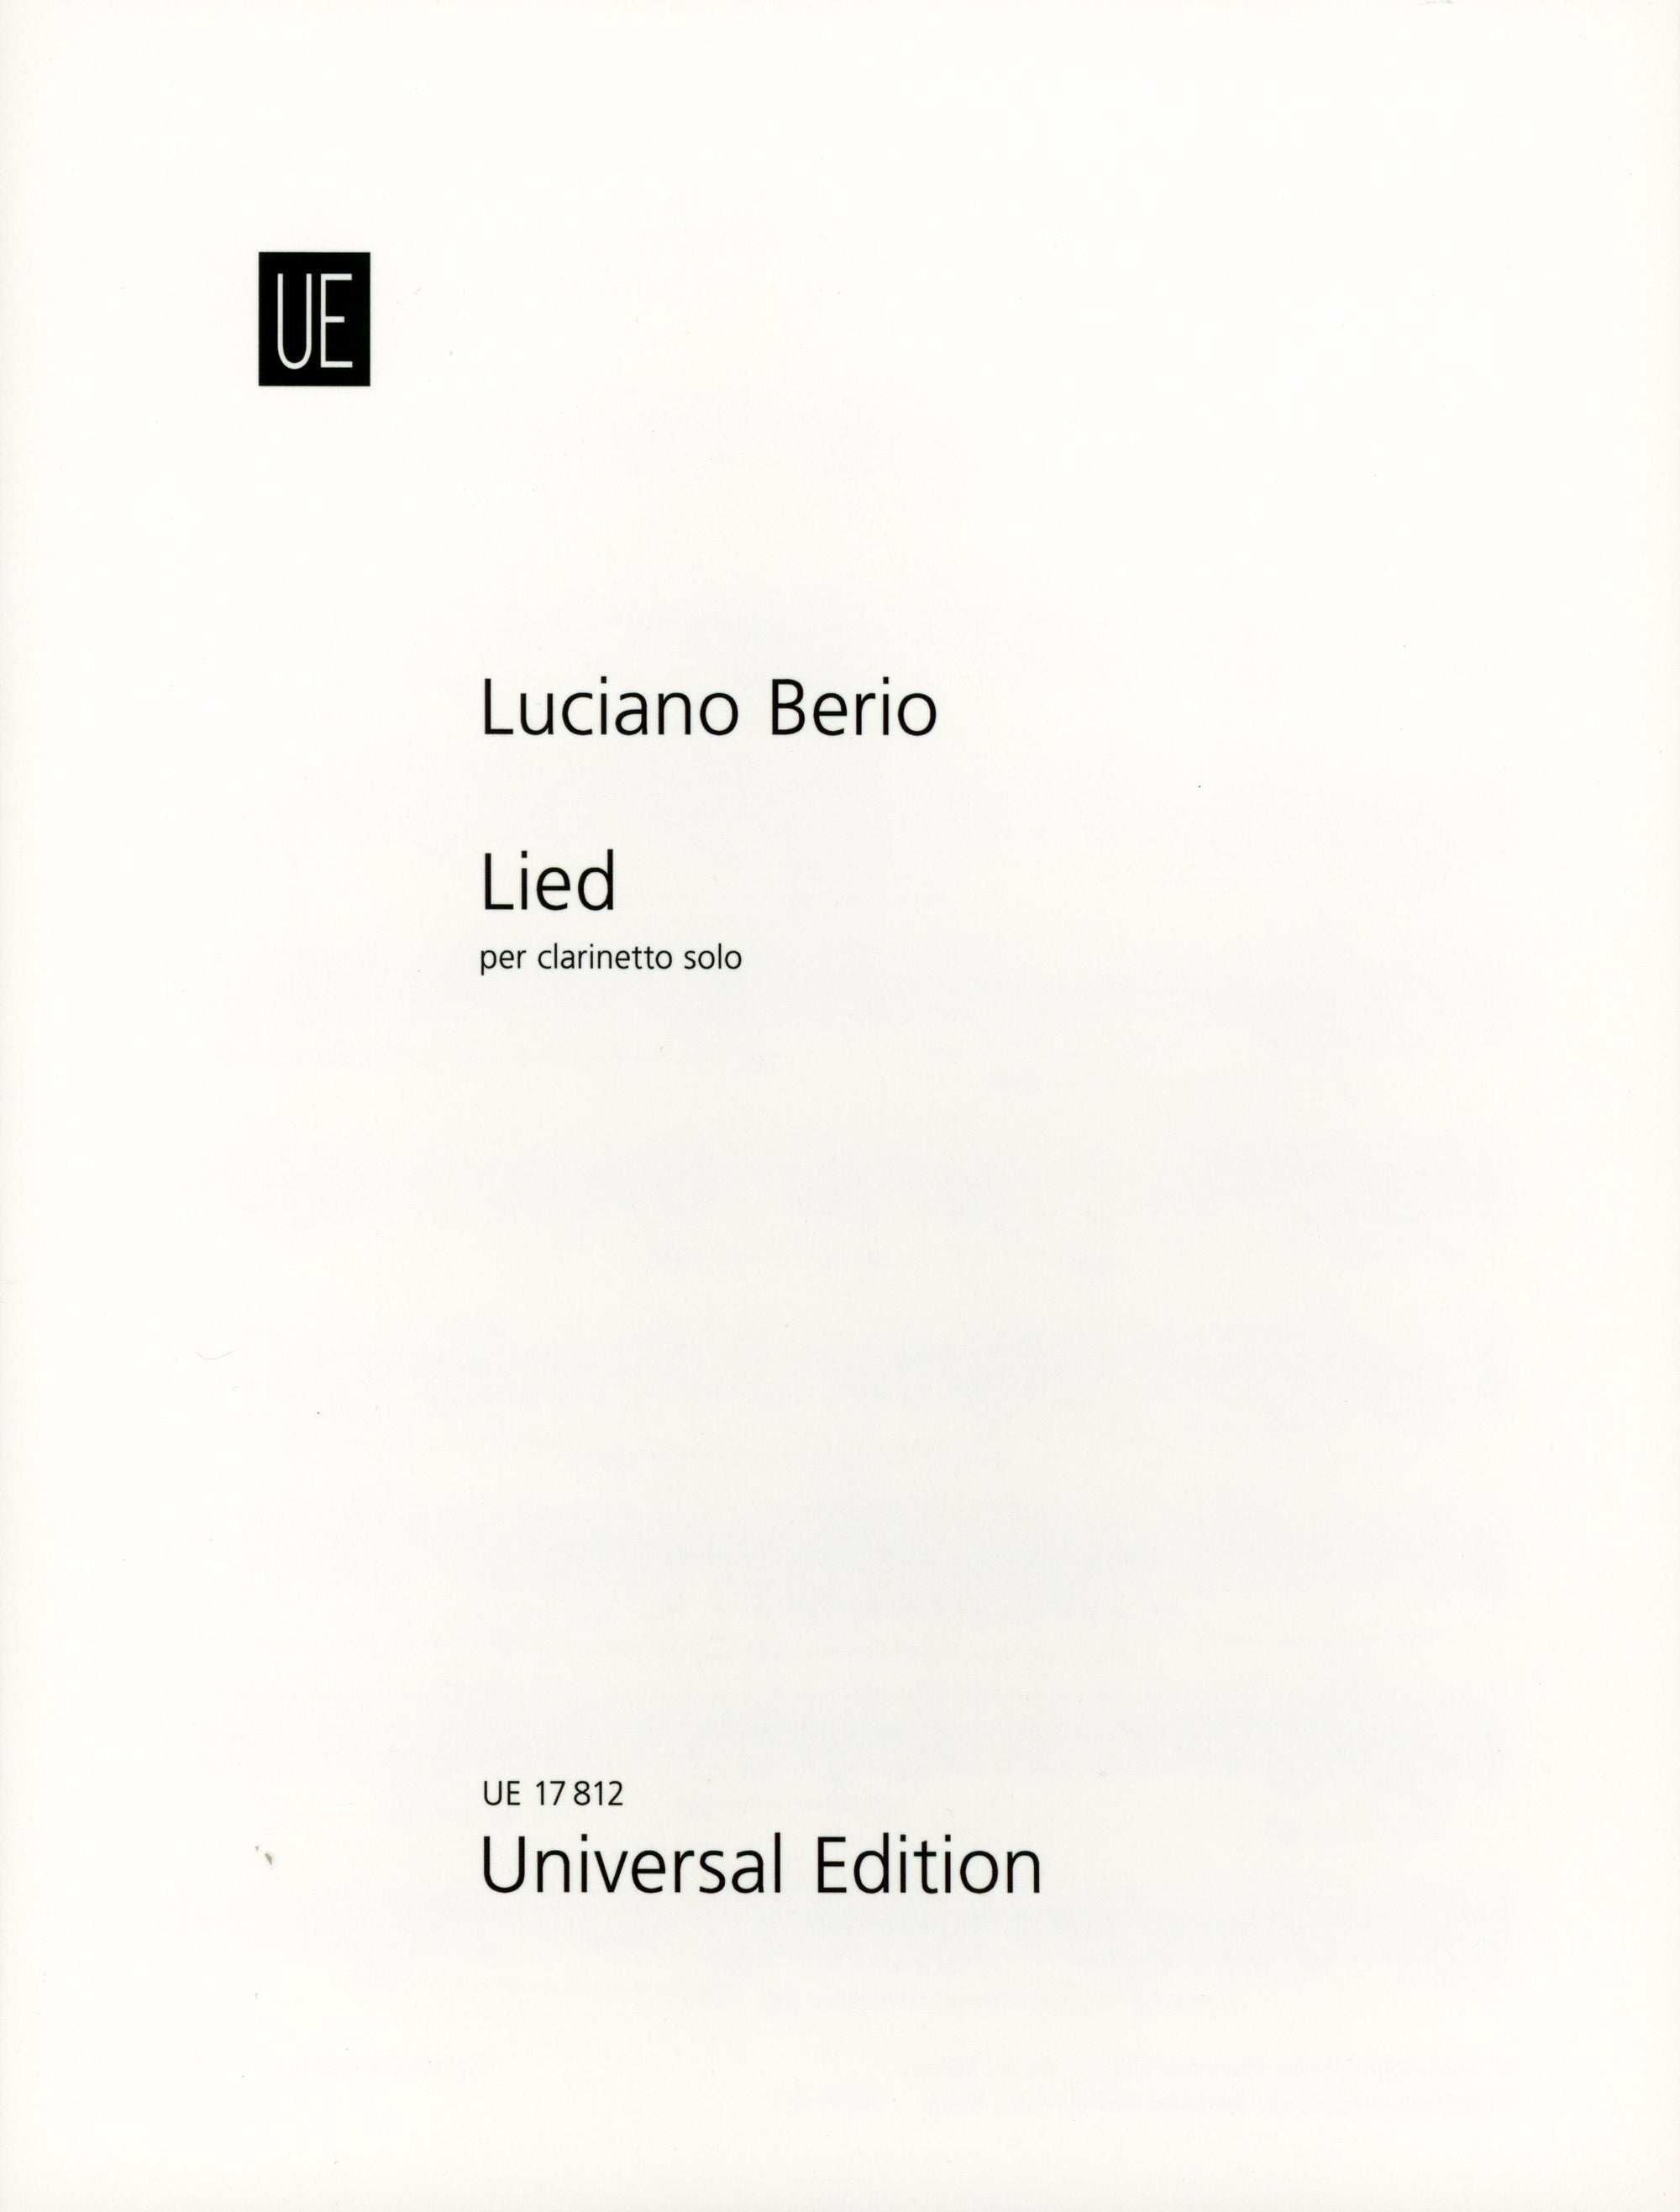 L. Berio: Lied (Song)